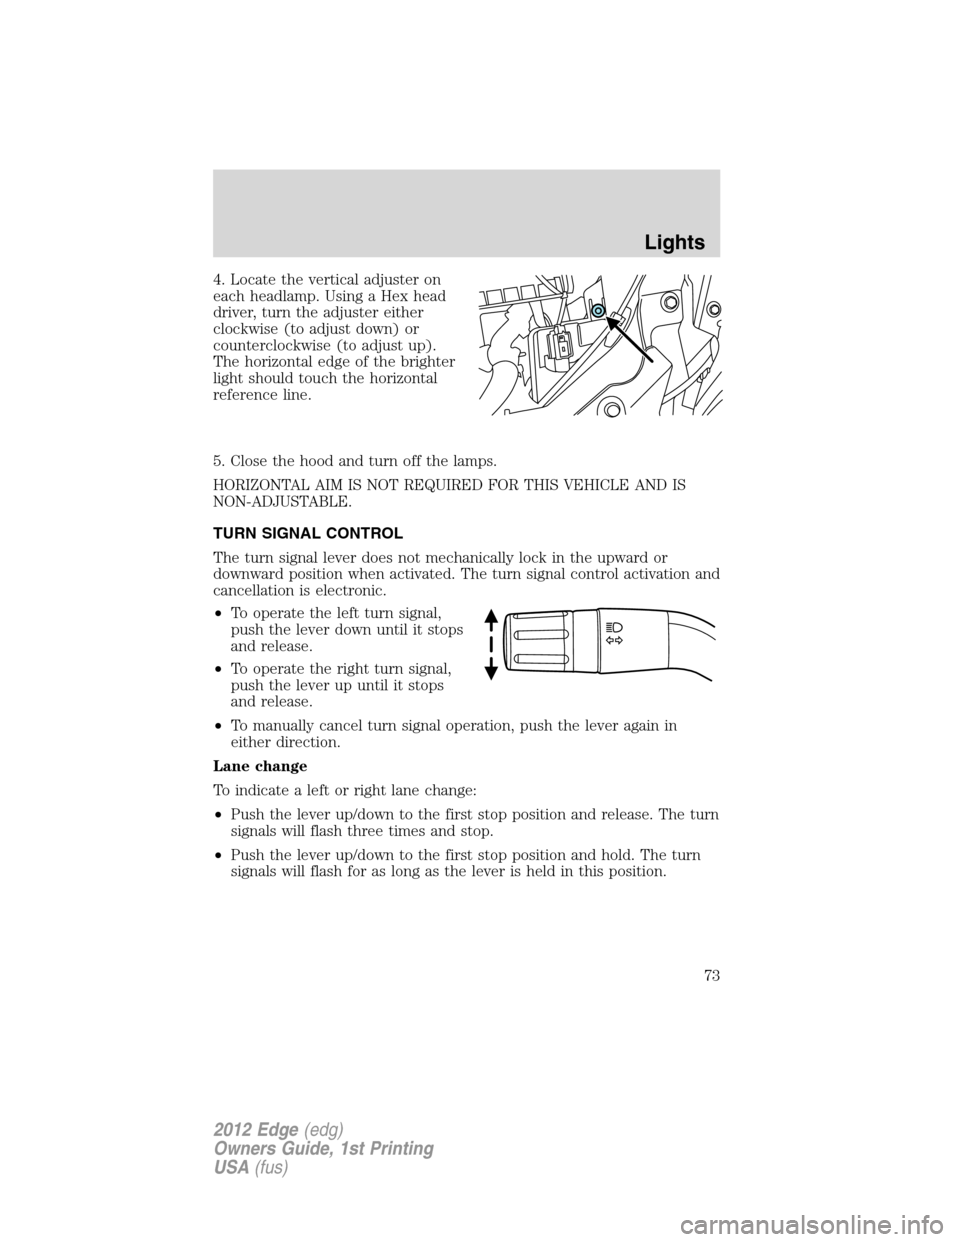 FORD EDGE 2012 1.G Manual PDF 4. Locate the vertical adjuster on
each headlamp. Using a Hex head
driver, turn the adjuster either
clockwise (to adjust down) or
counterclockwise (to adjust up).
The horizontal edge of the brighter
l